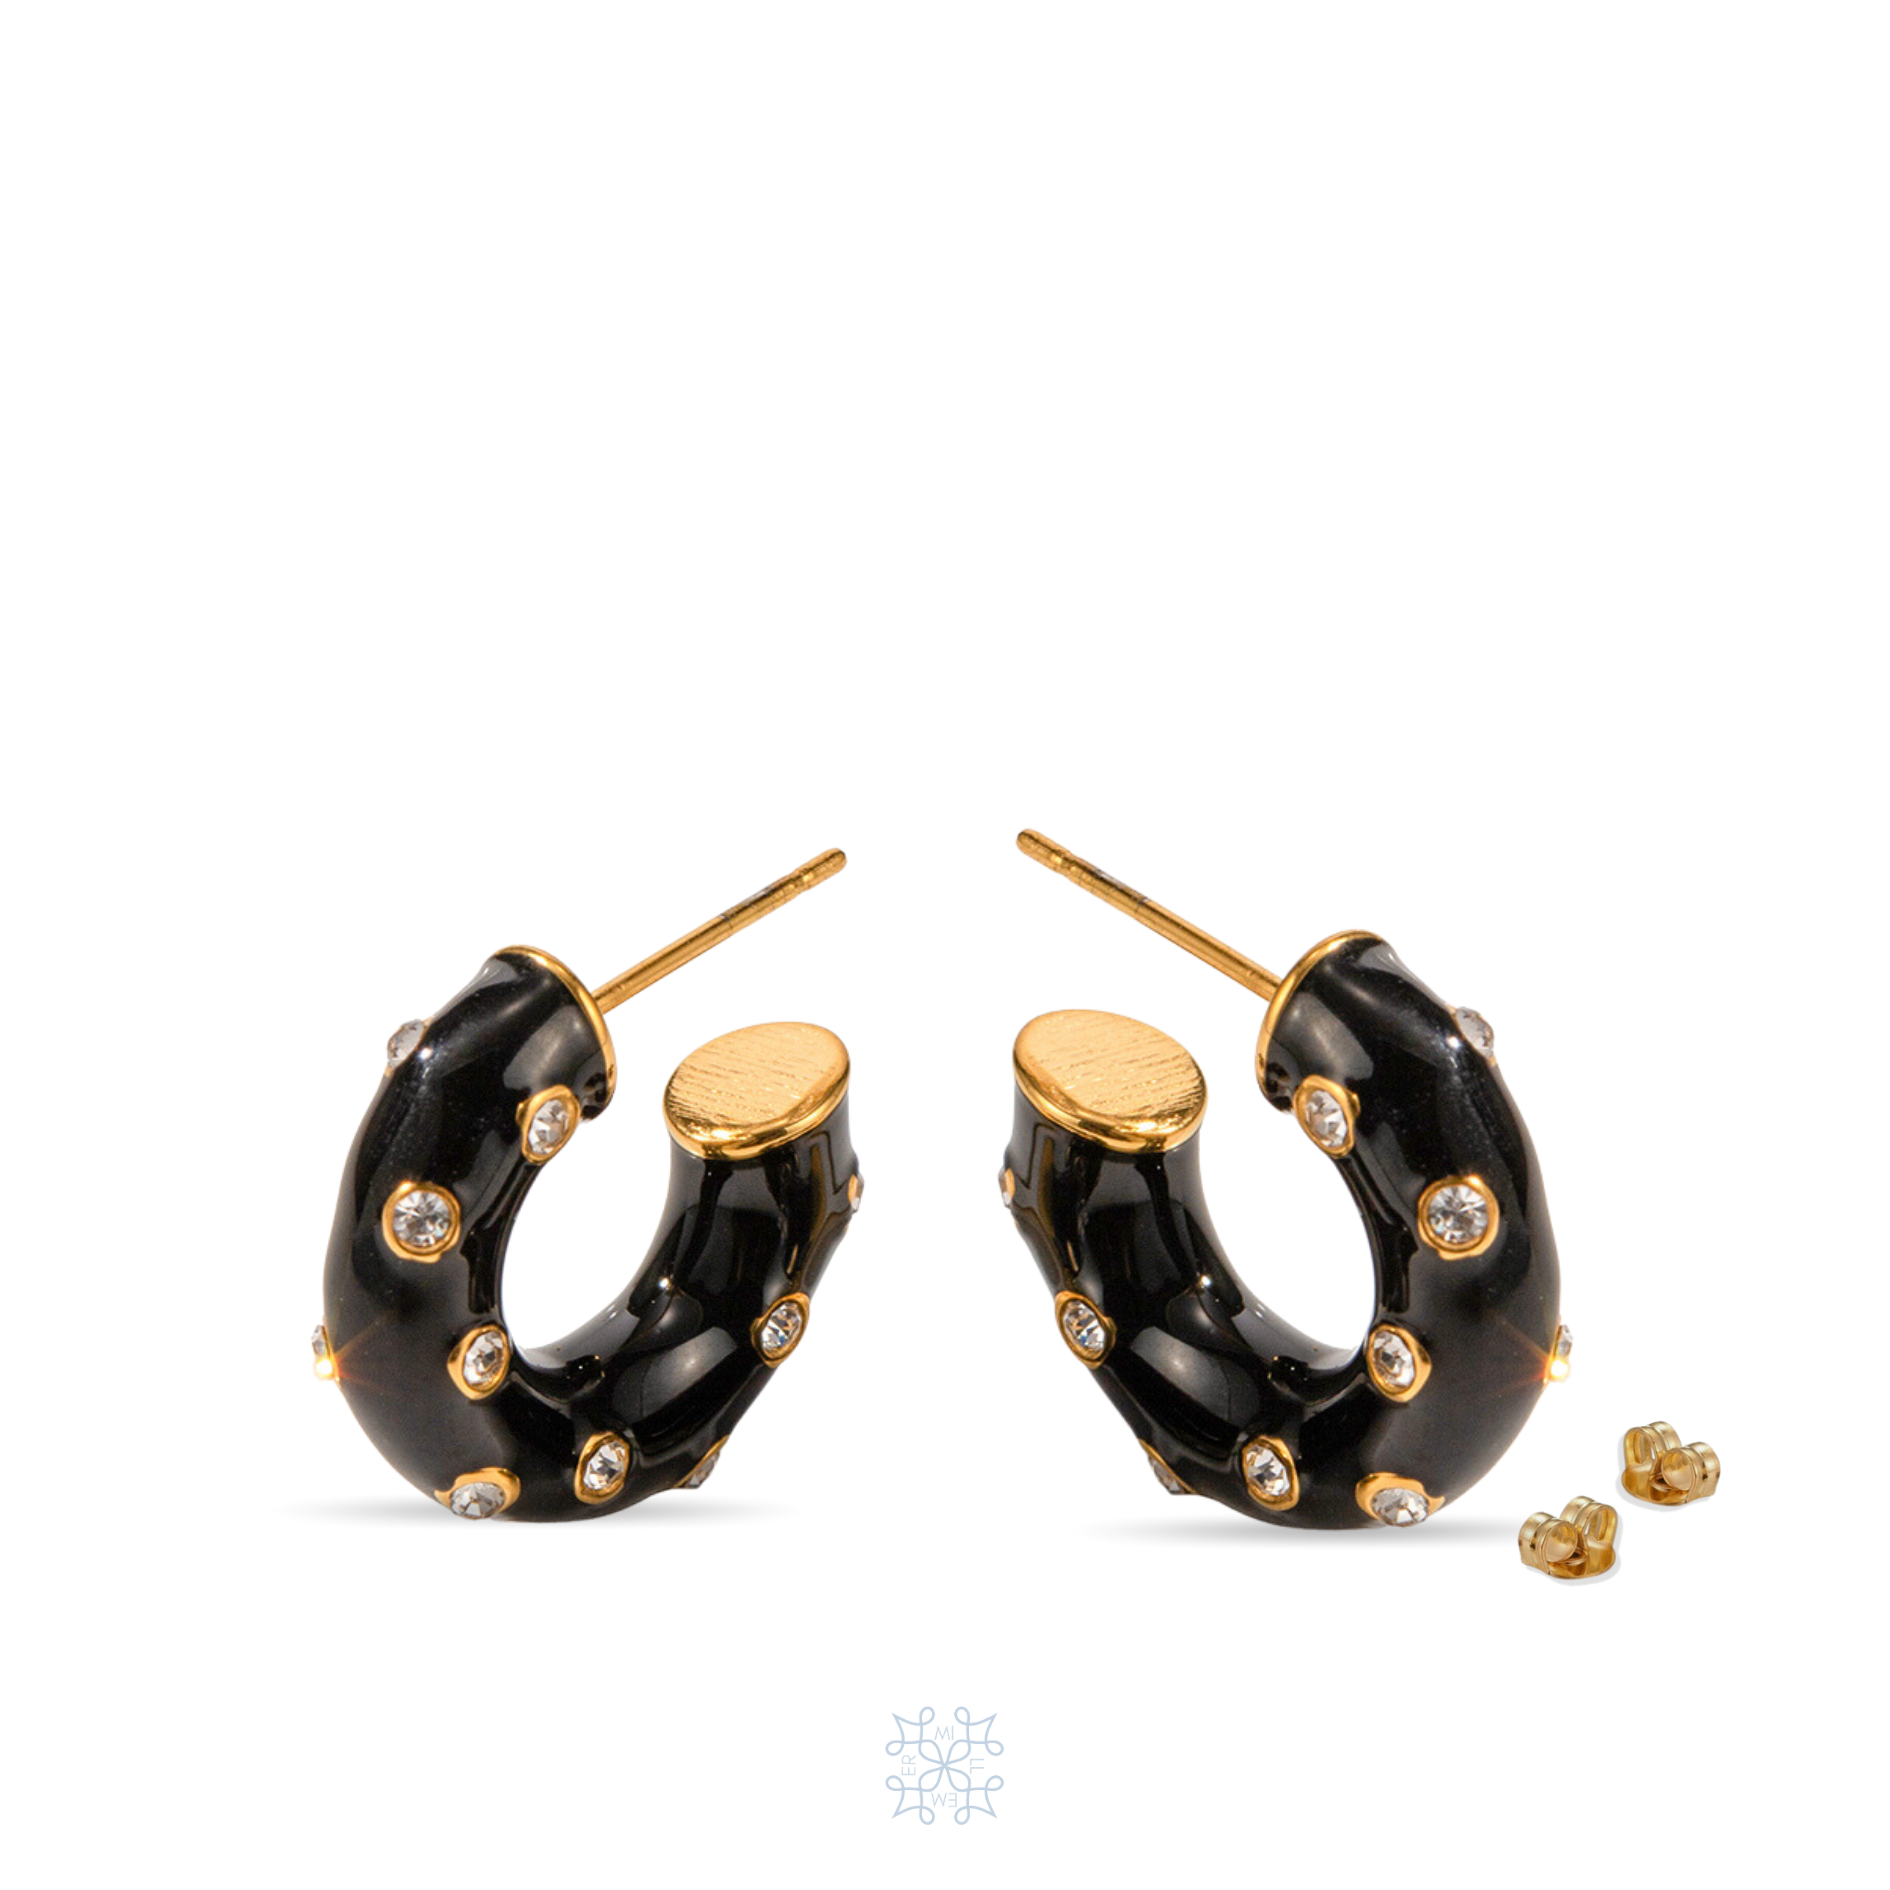 Gold plated Hoop Earrings painted with black enamel and adorned with zircons.